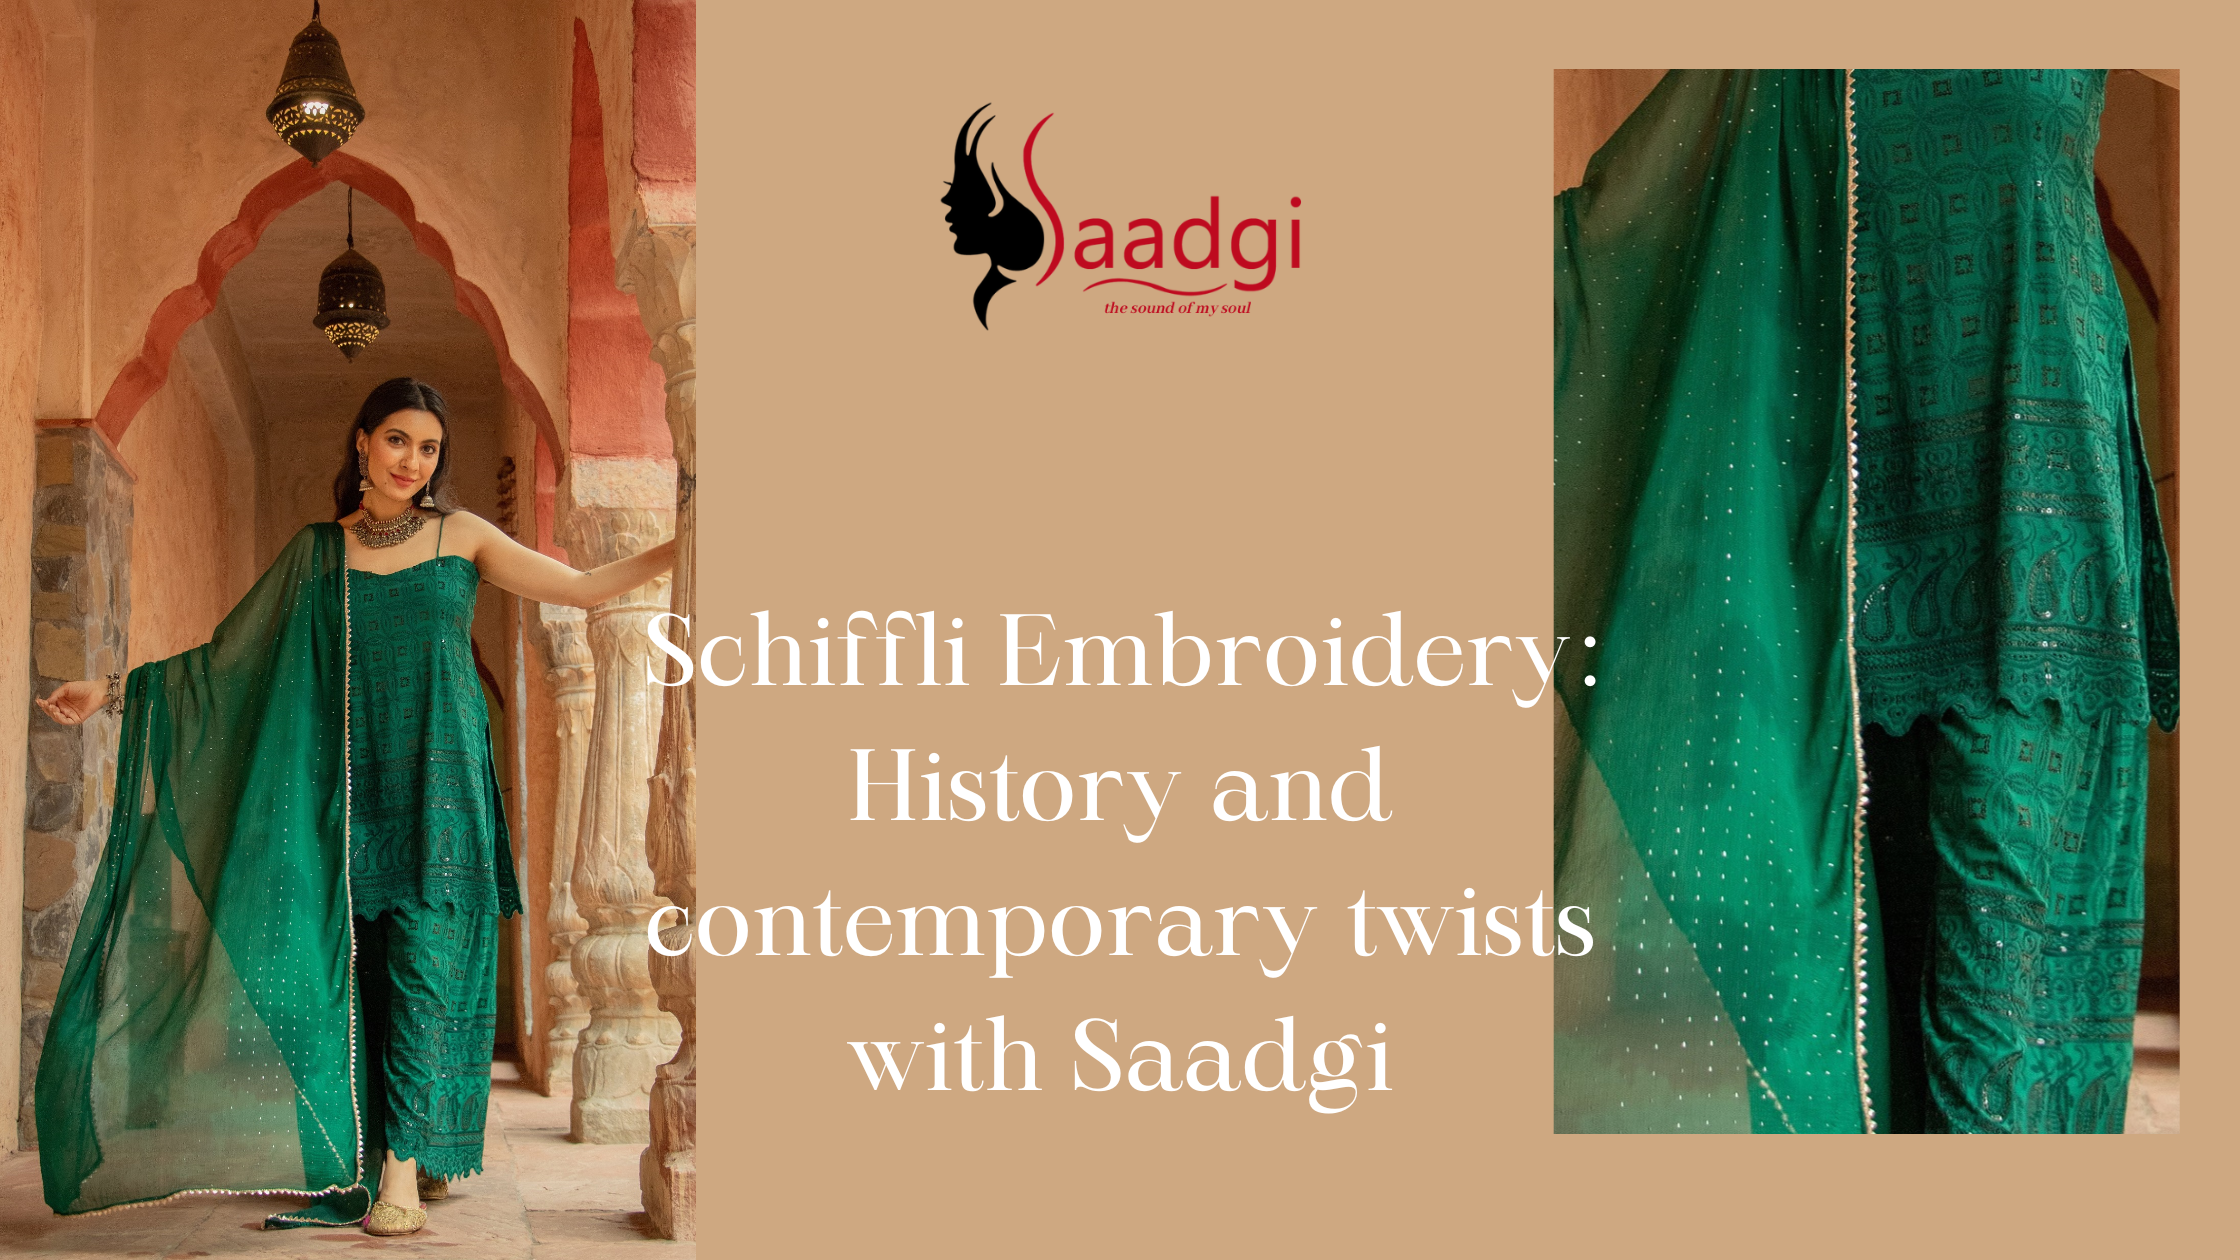 Schiffli Embroidery: History and contemporary twists with Saadgi